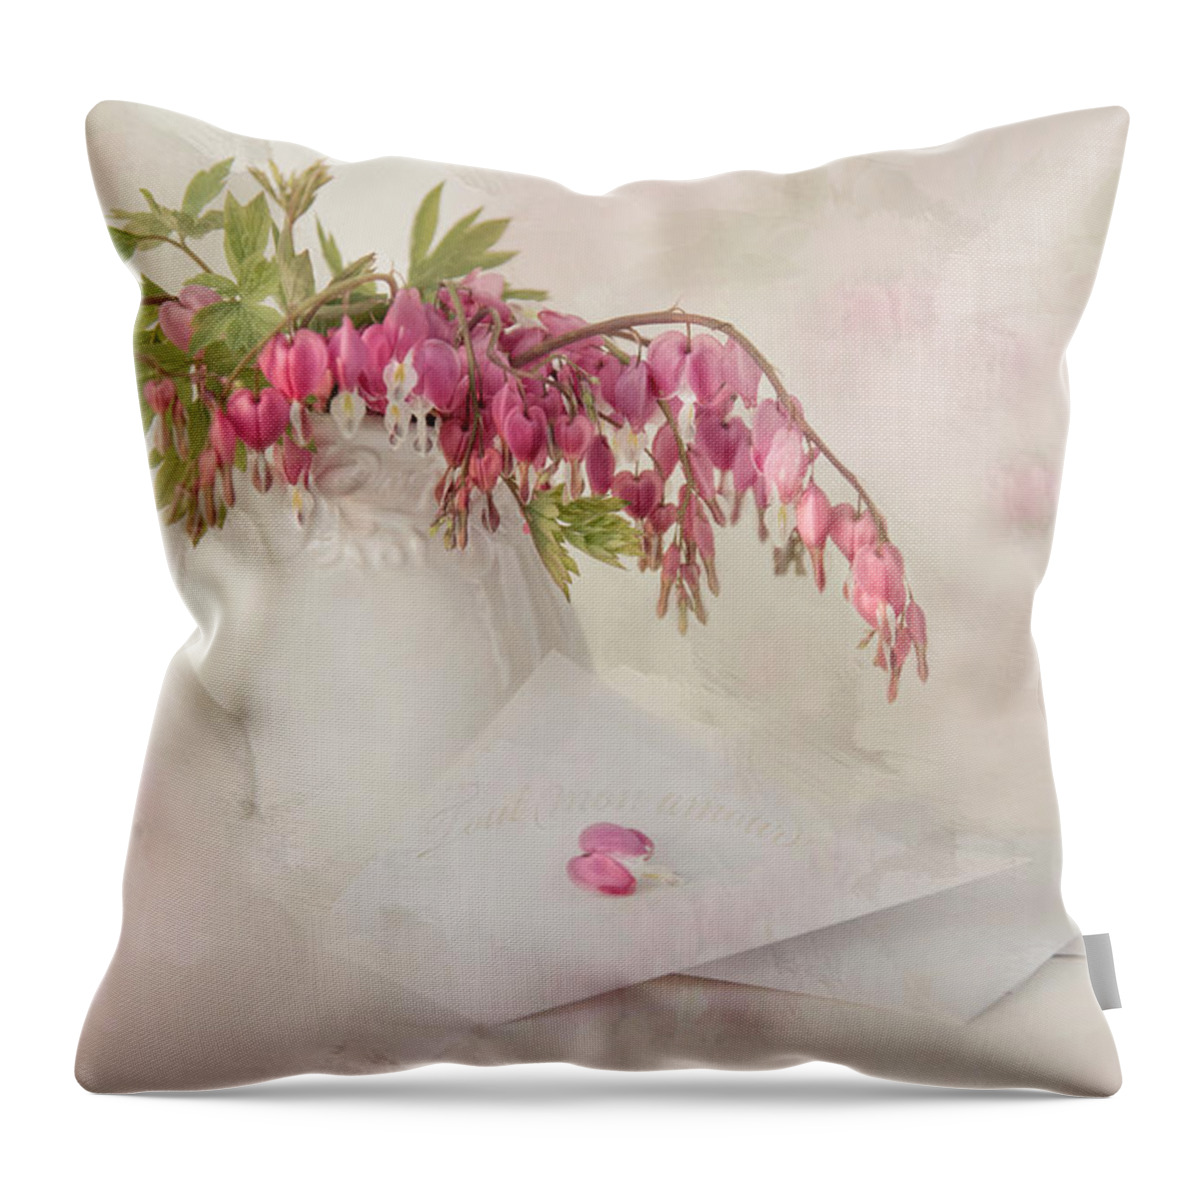 Bleeding Heart Throw Pillow featuring the photograph Love Letters by Robin-Lee Vieira